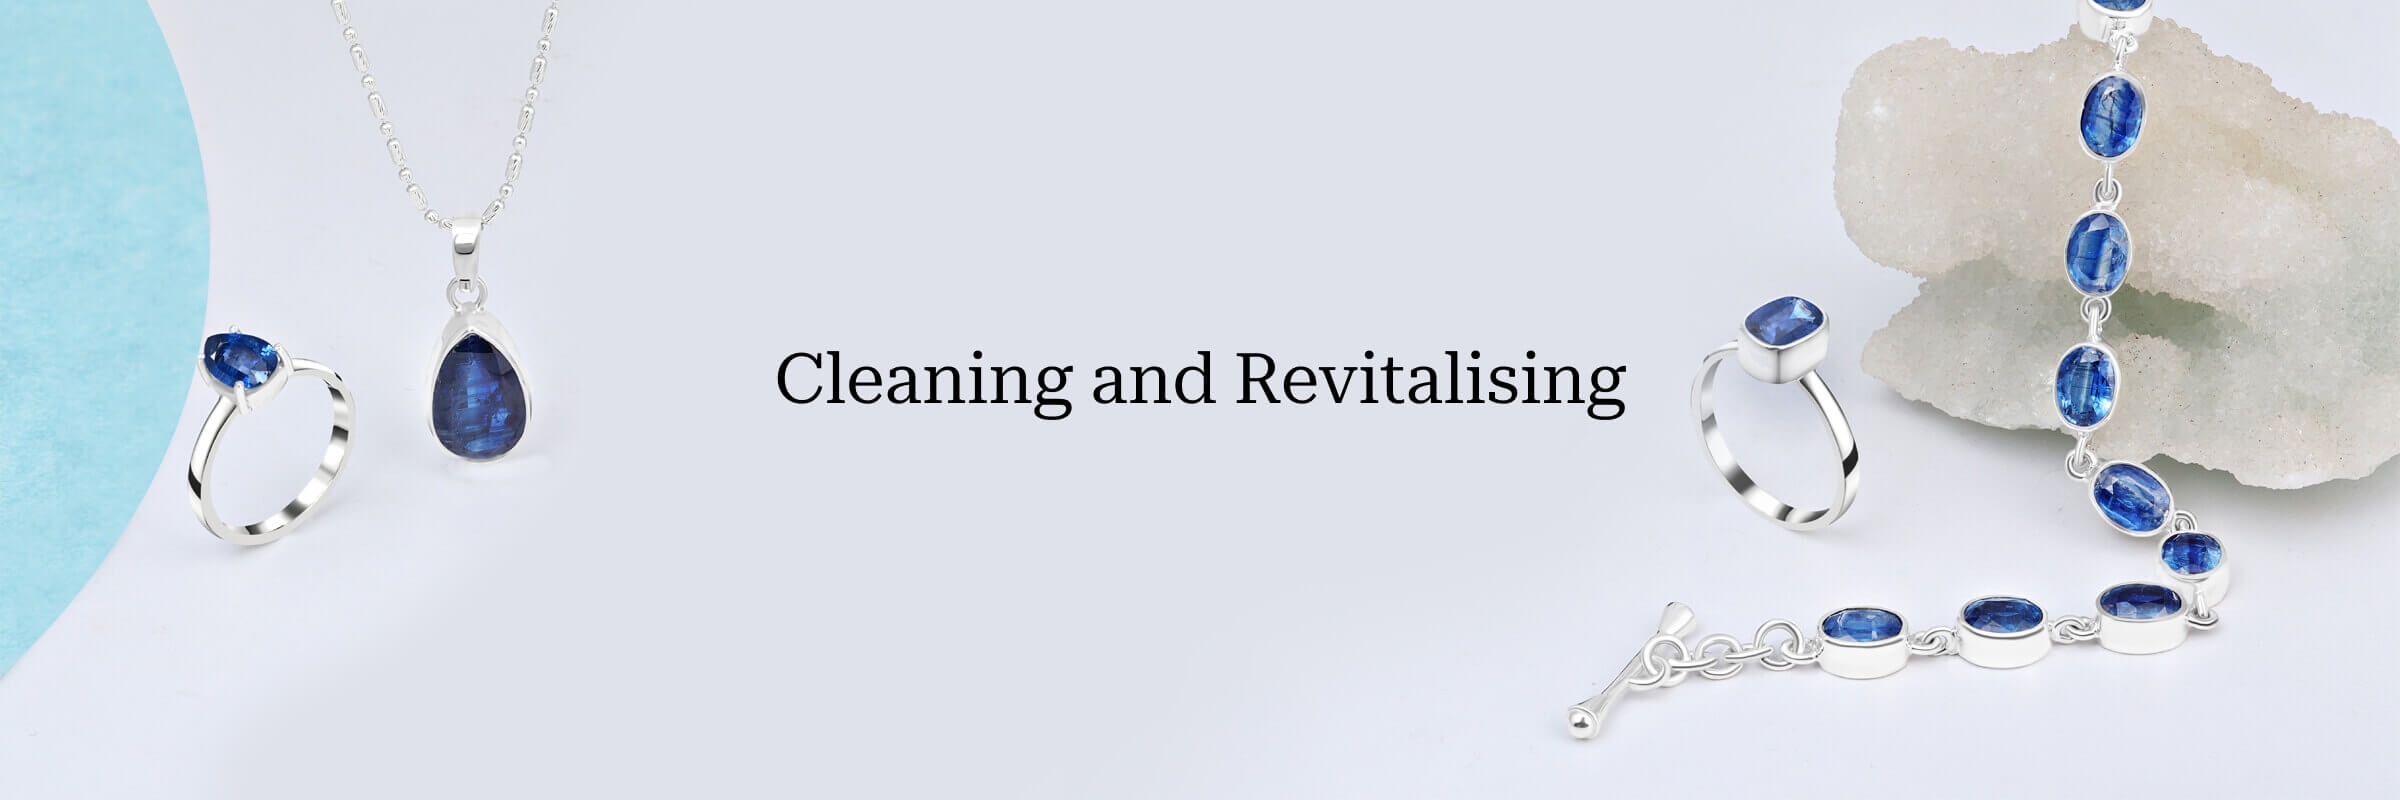 cleaning and revitalising